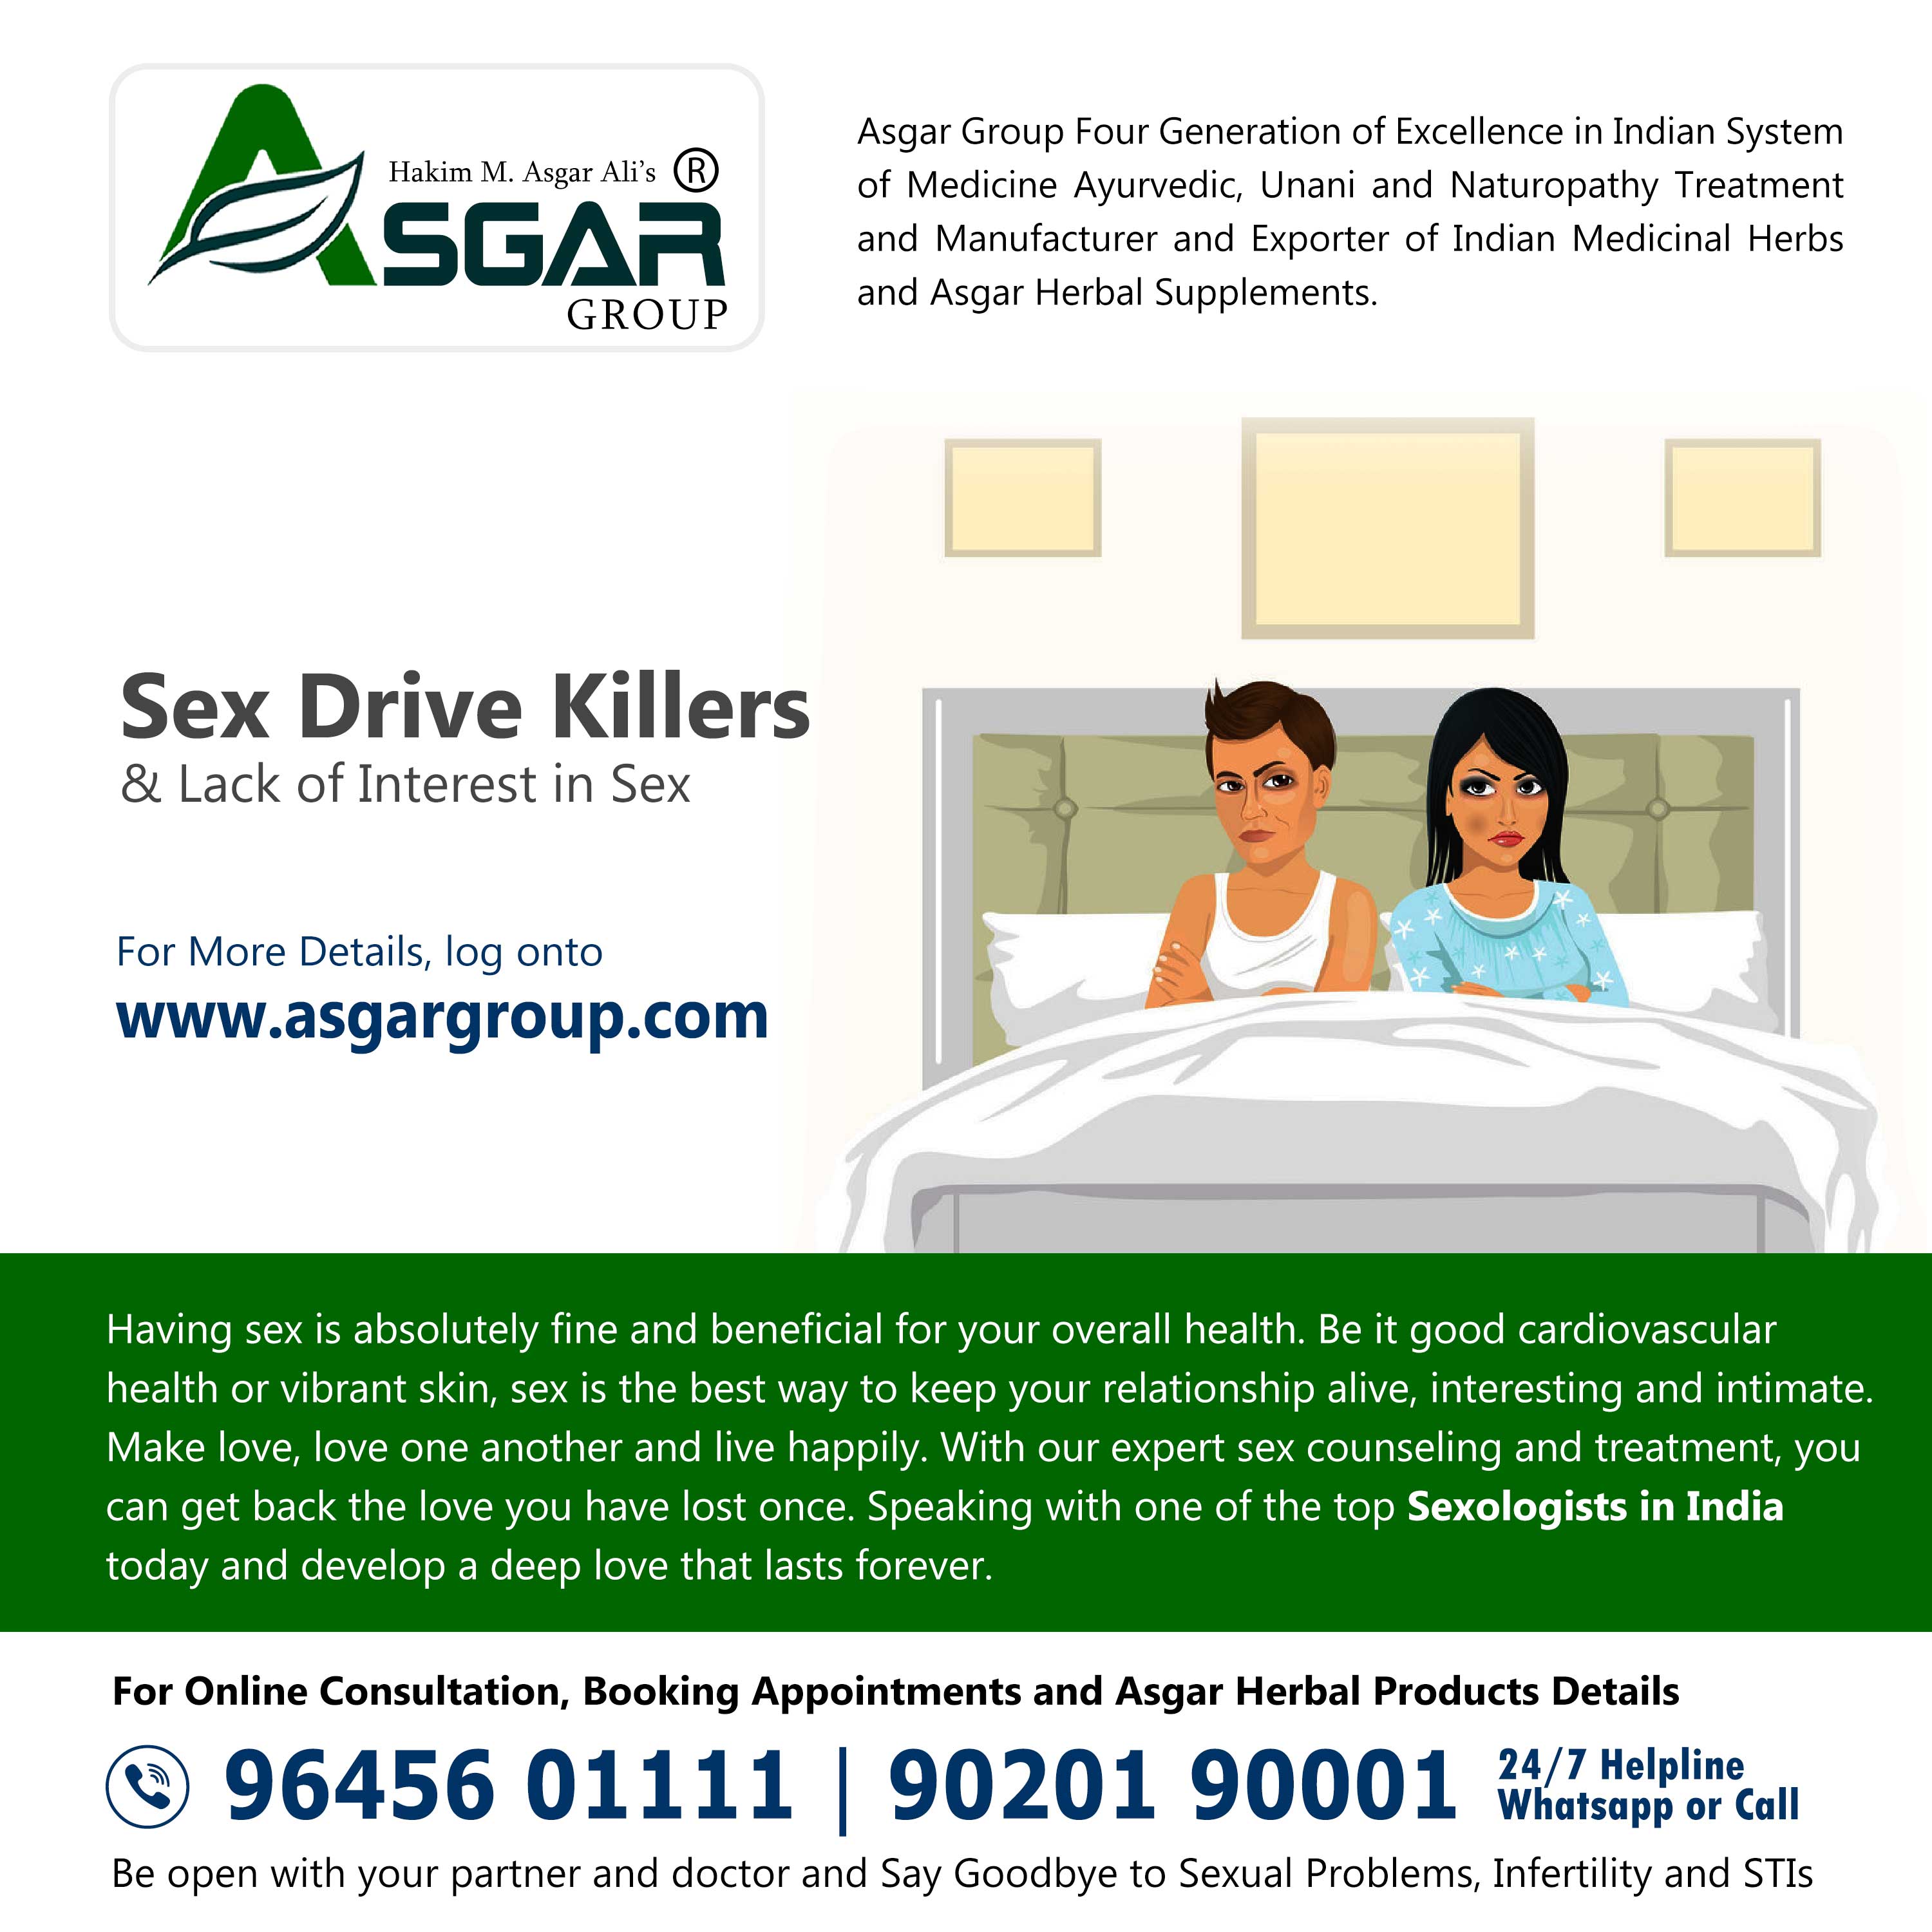 Sex Drive Erection killers in bed low libido partners treatment roy medical hall sexologist in kerala asgar herbal group india